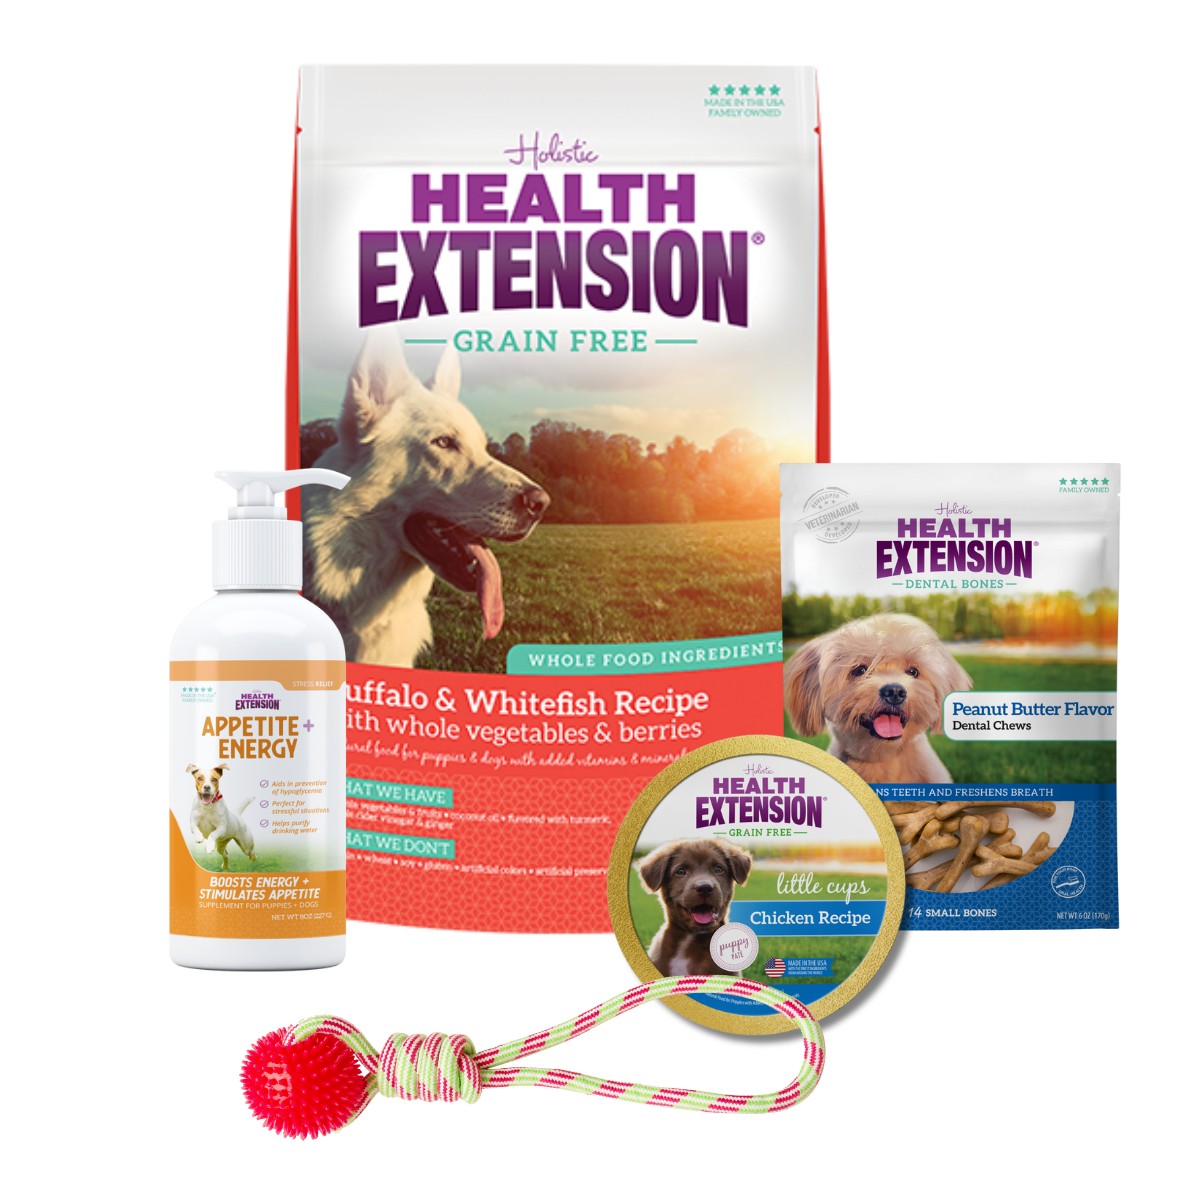 Complete Puppy Bundle: Health Extension Grain Free Buffalo & Whitefish Dry Dog Food and variety of other dog products, including food, treats, toys, and supplements.